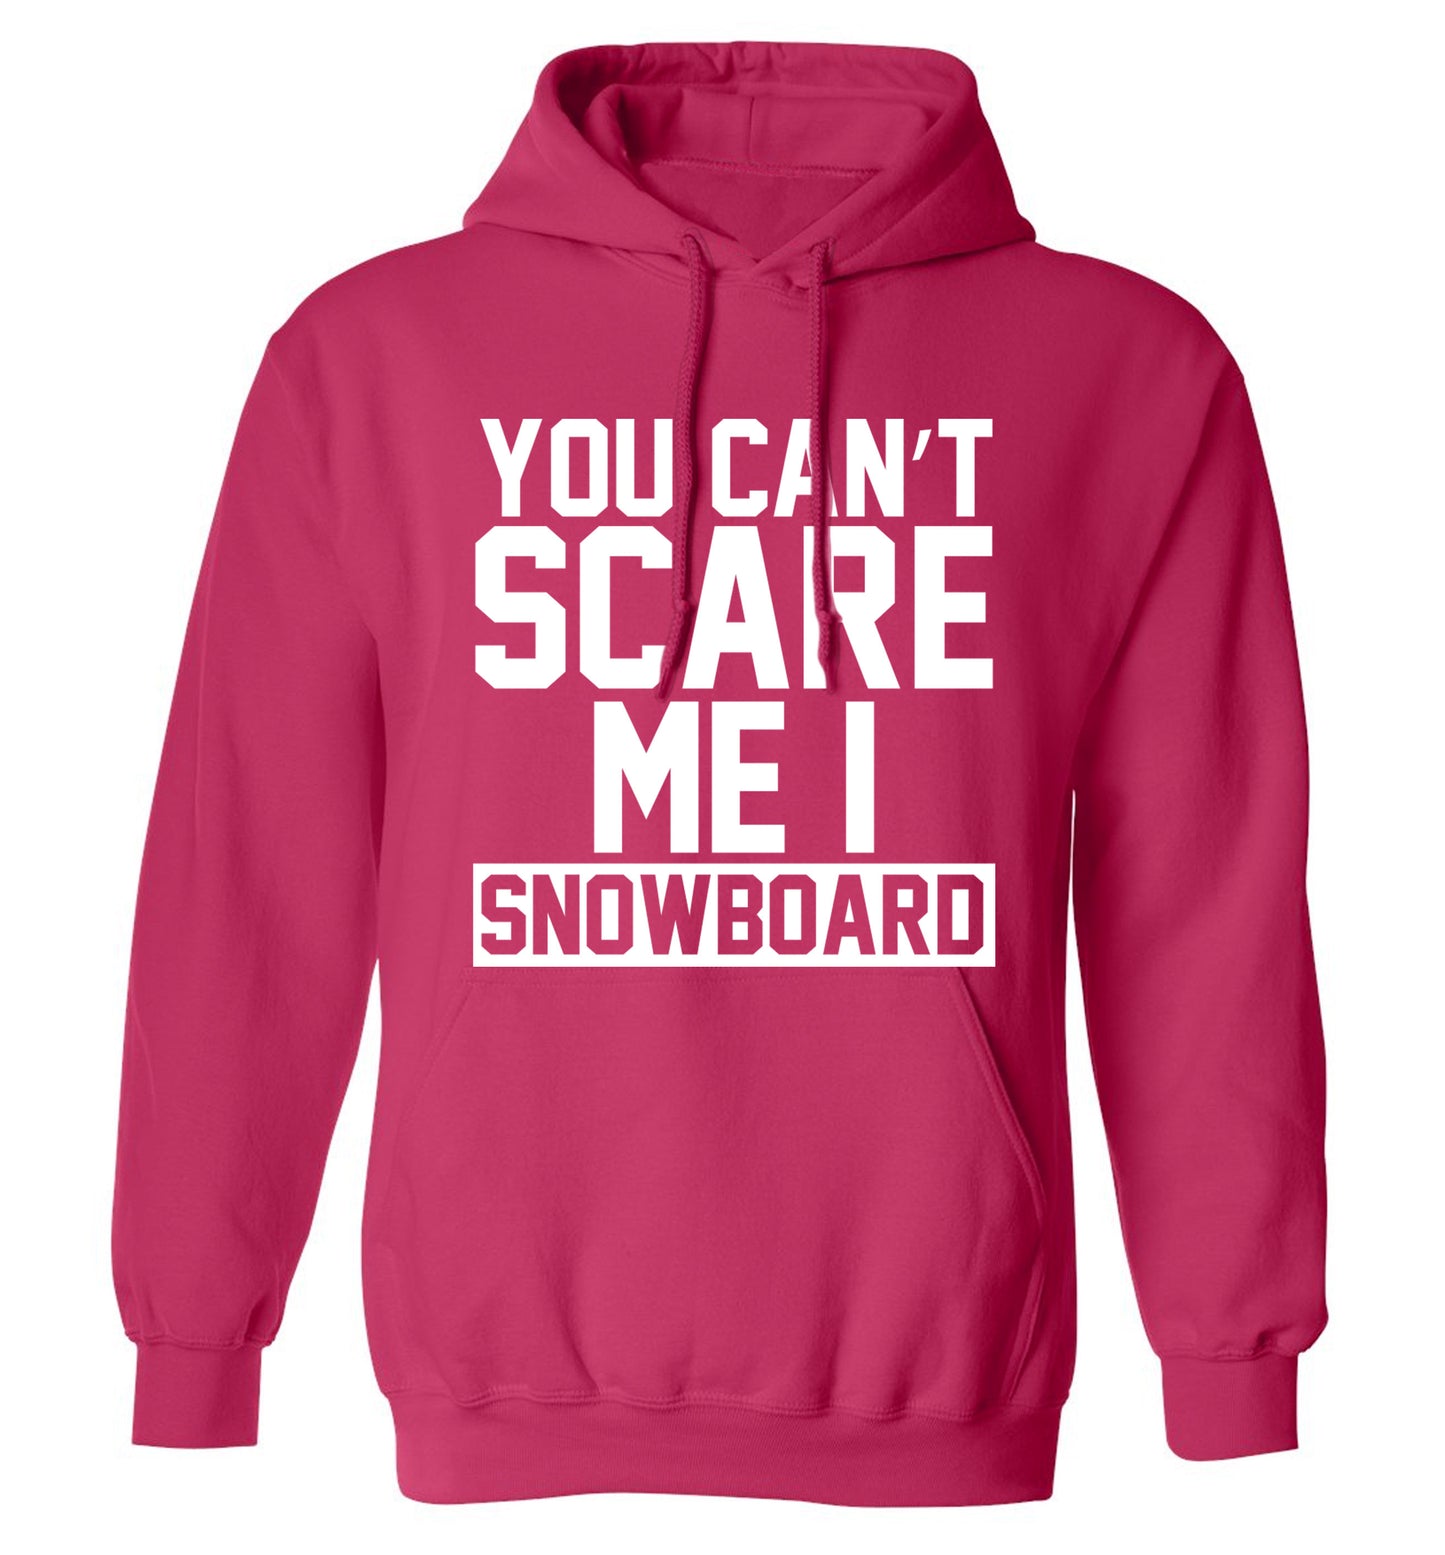 You can't scare me I snowboard adults unisex pink hoodie 2XL